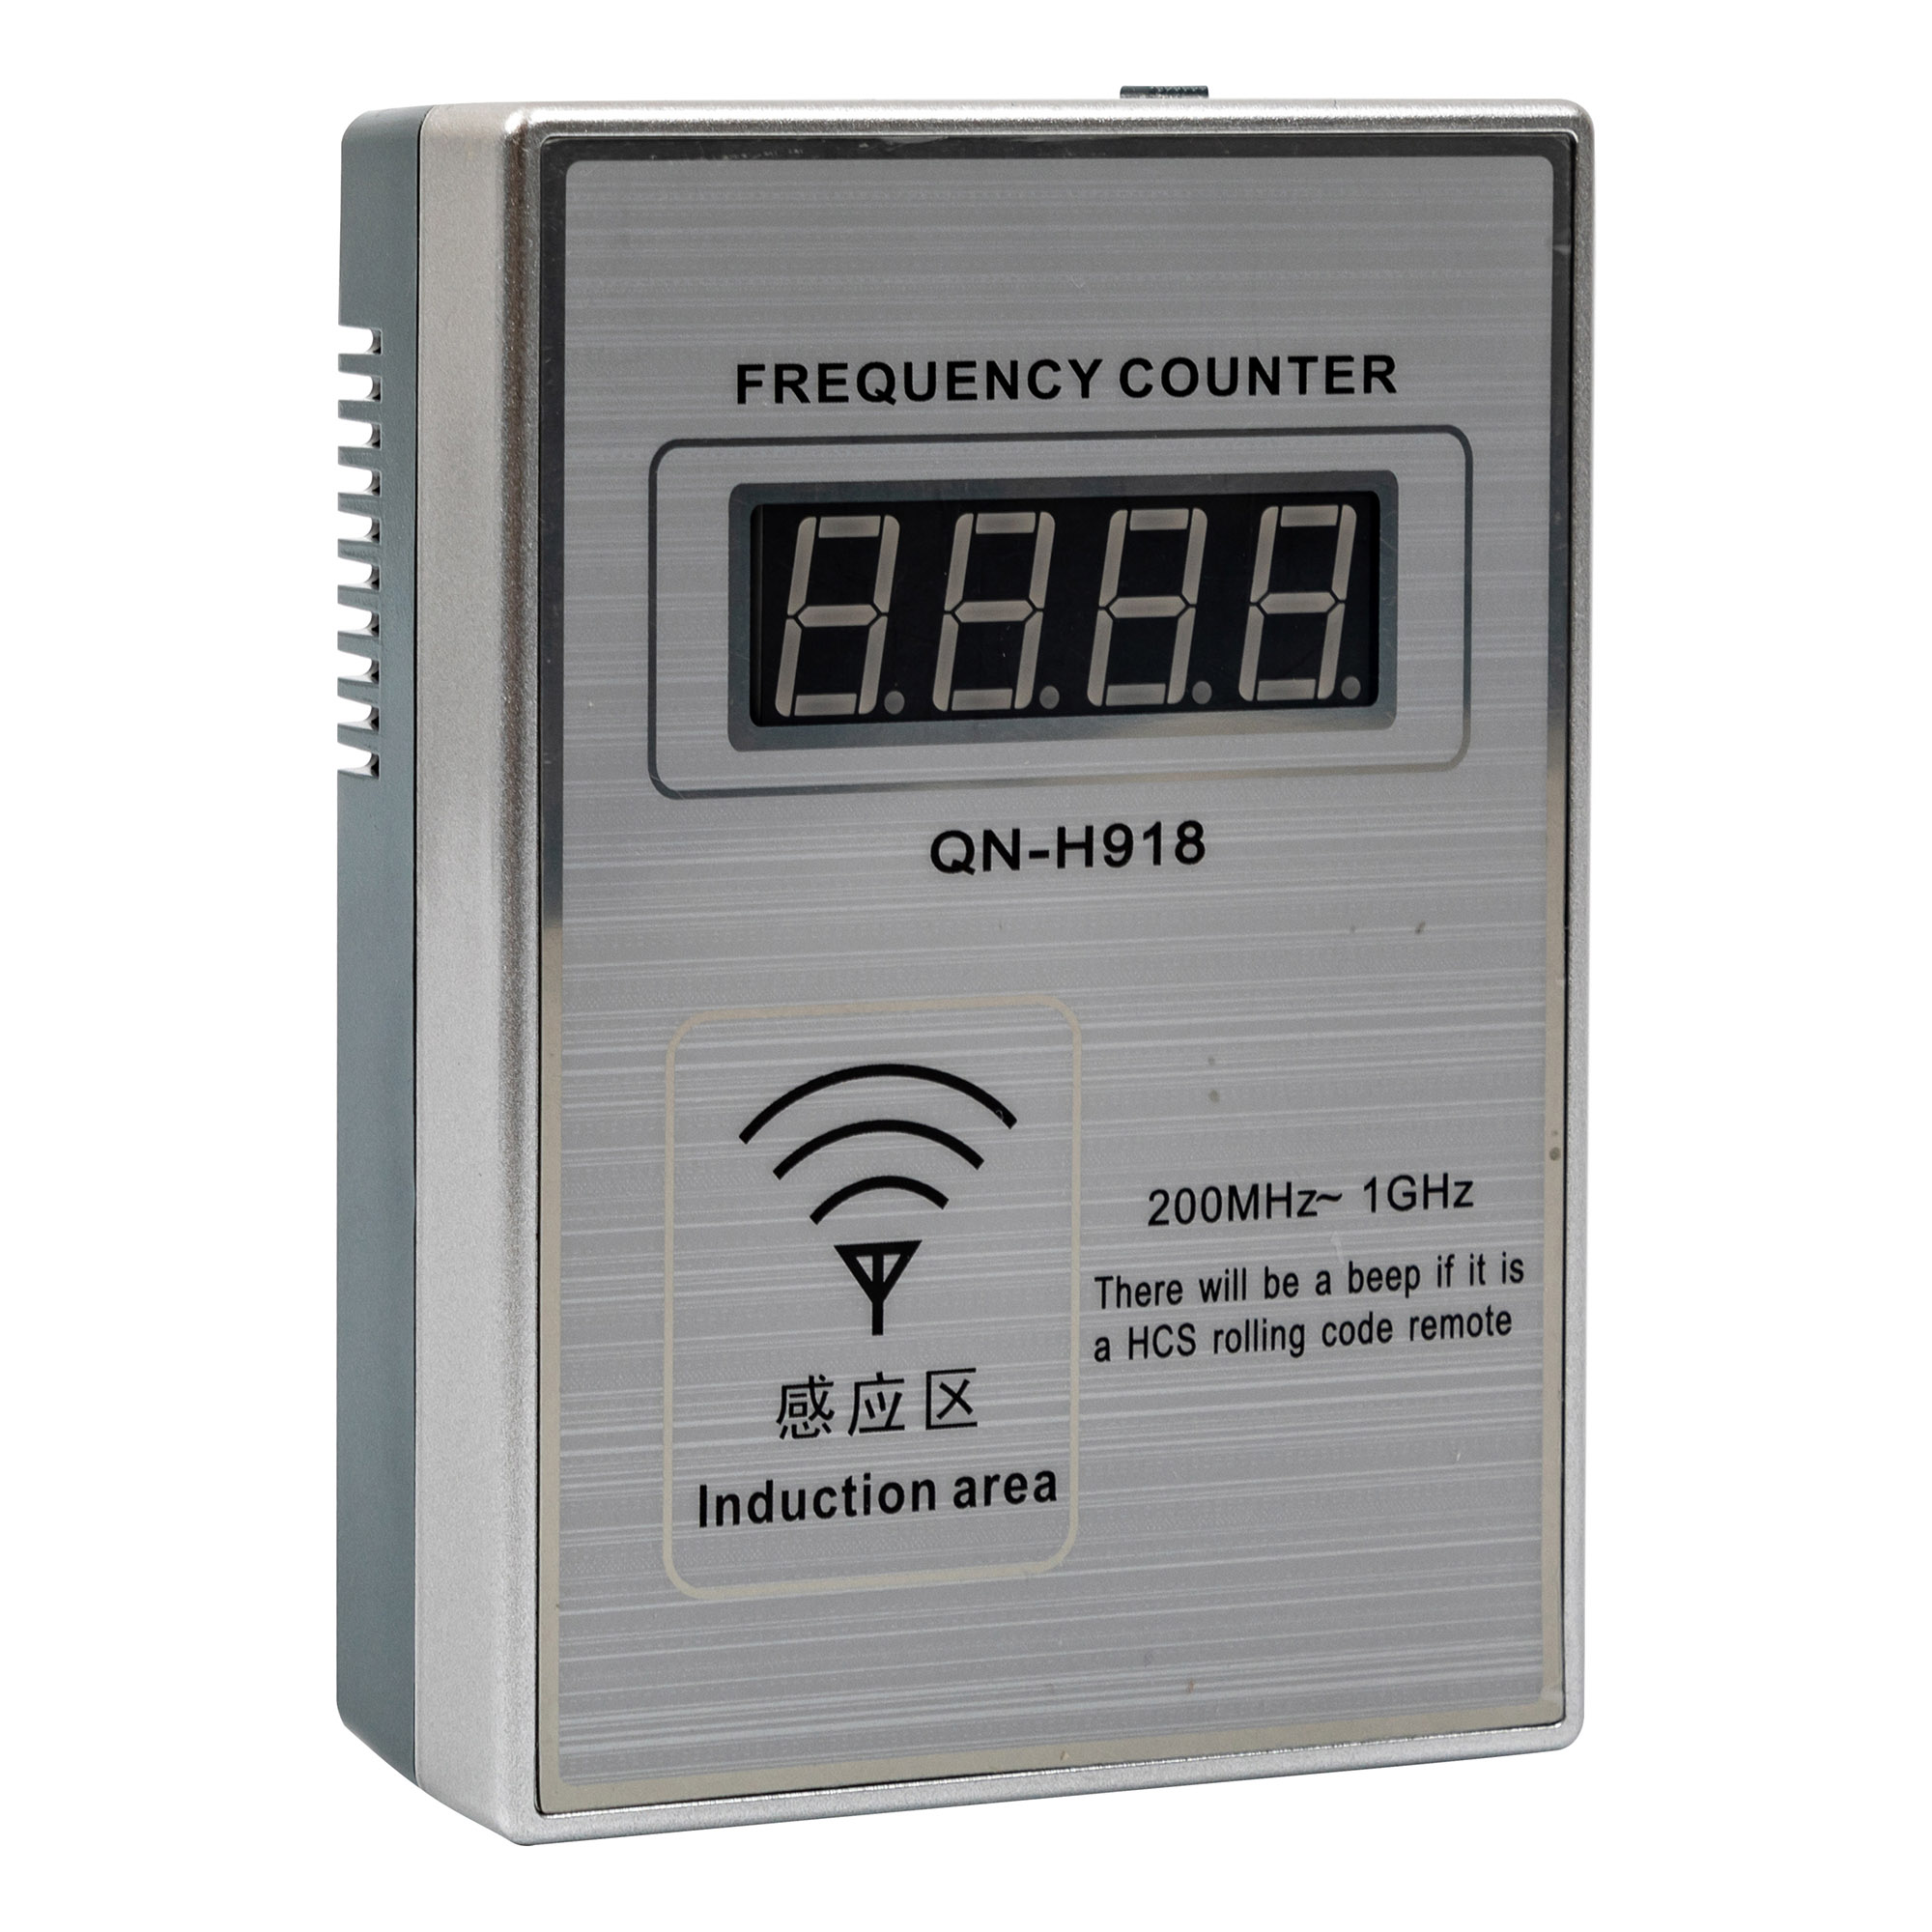 How is the accuracy of a frequency meter determined, and what factors can affect its precision?